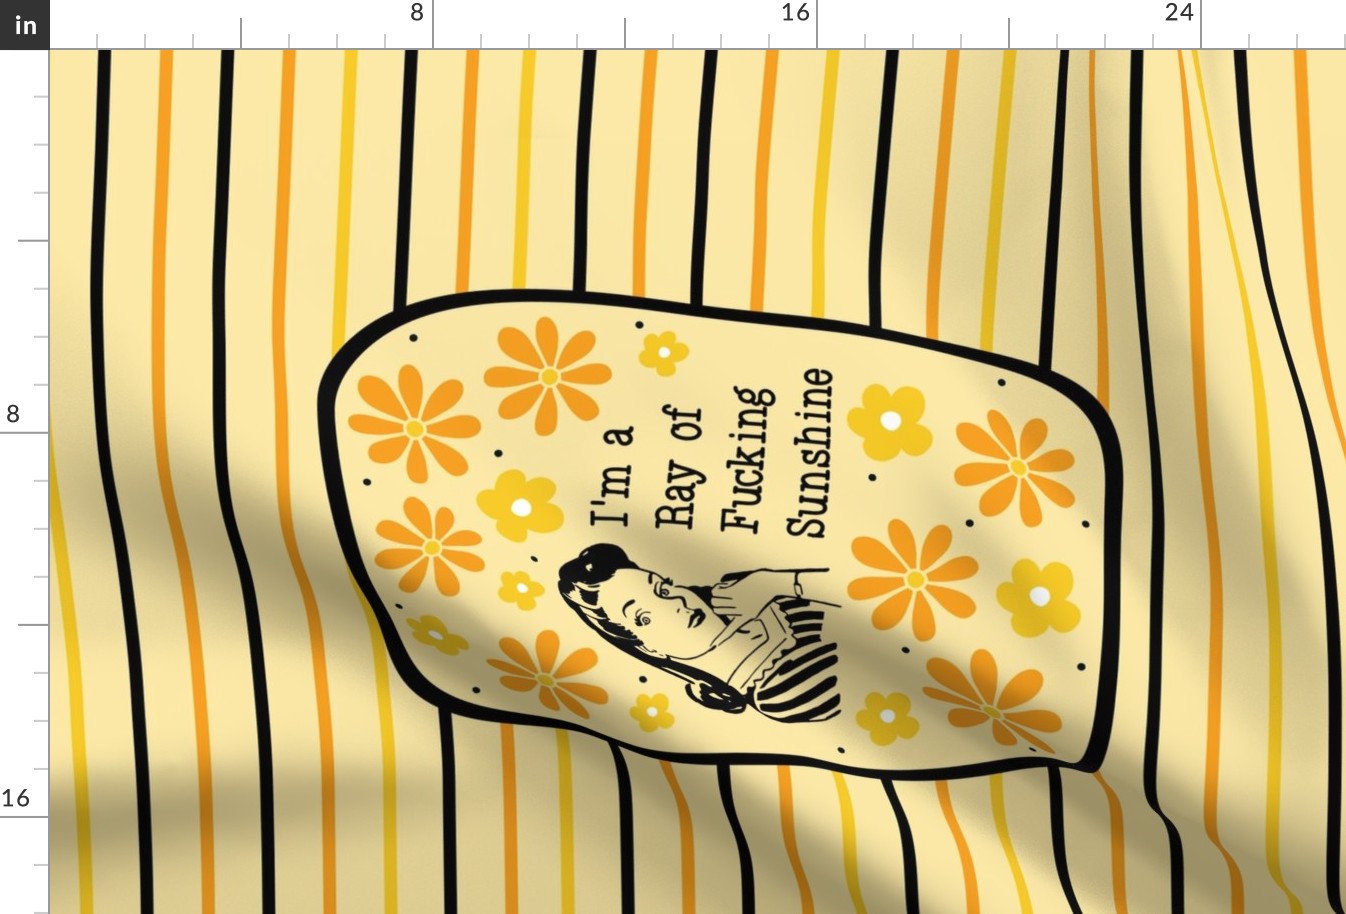 27x18 Panel Sassy Ladies I'm a Ray of Fucking Sunshine Yellow for Wall Hanging or Tea Towel